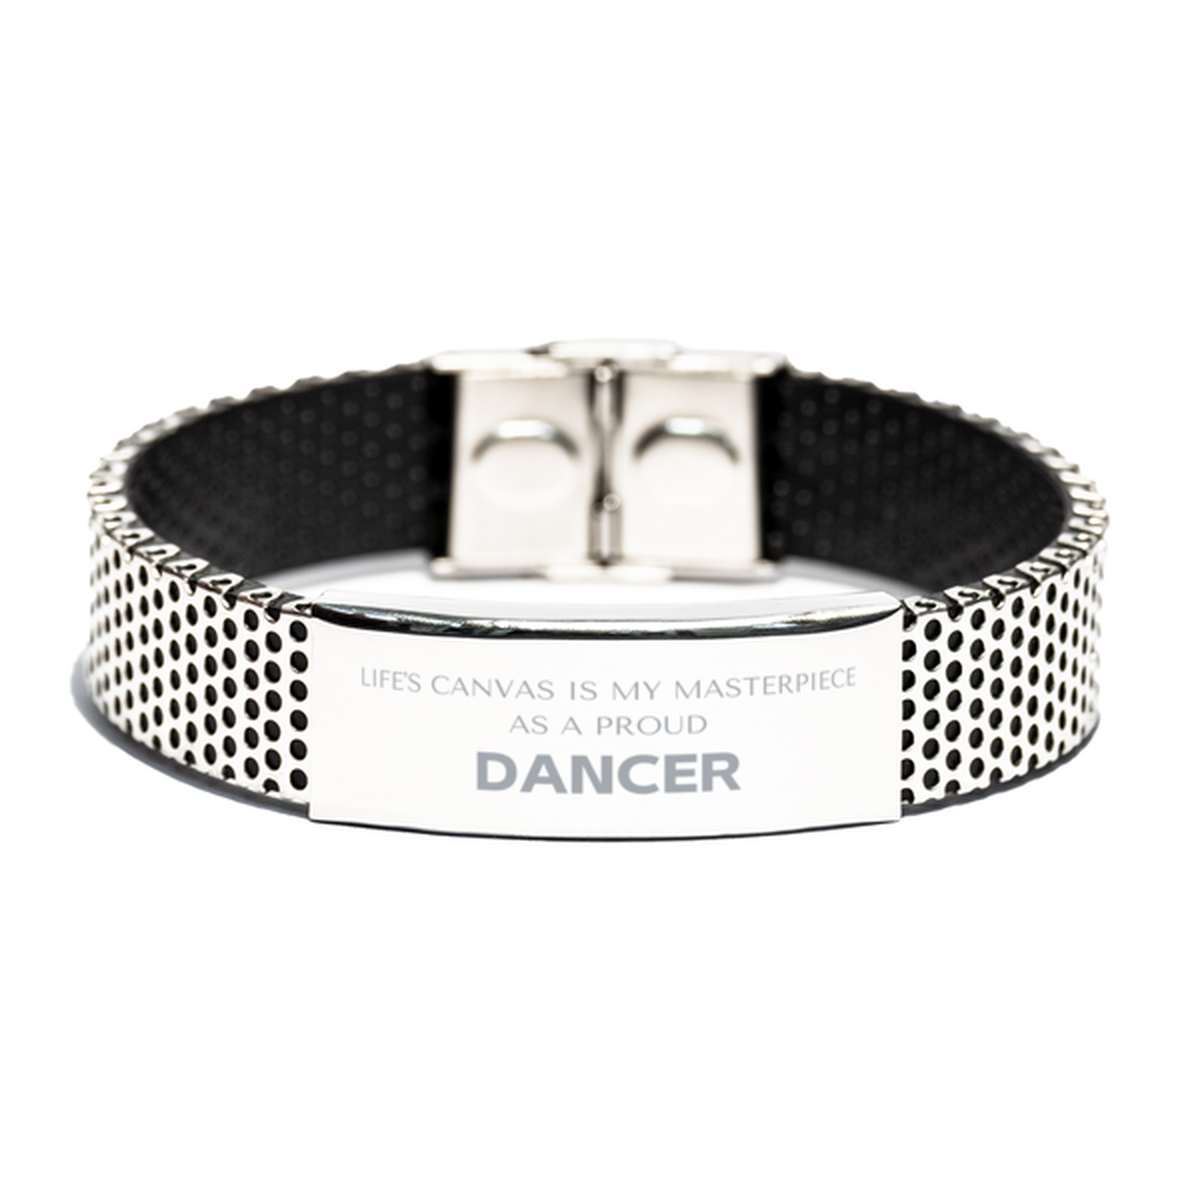 Proud Dancer Gifts, Life's canvas is my masterpiece, Epic Birthday Christmas Unique Stainless Steel Bracelet For Dancer, Coworkers, Men, Women, Friends